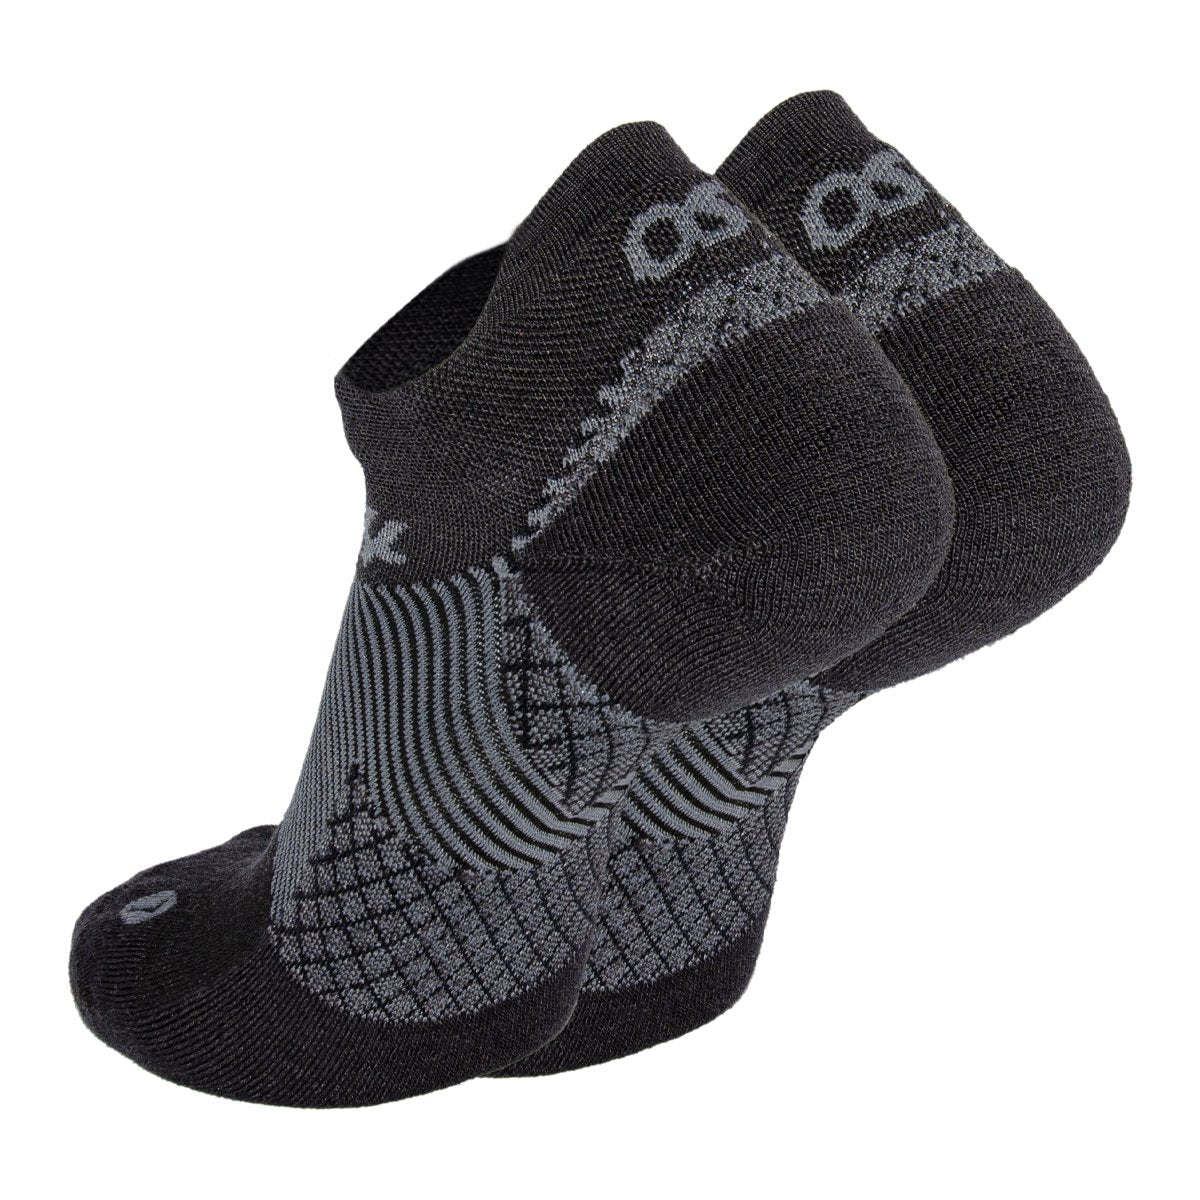 Compression Ankle Brace - The AF7 – Orthosleeve